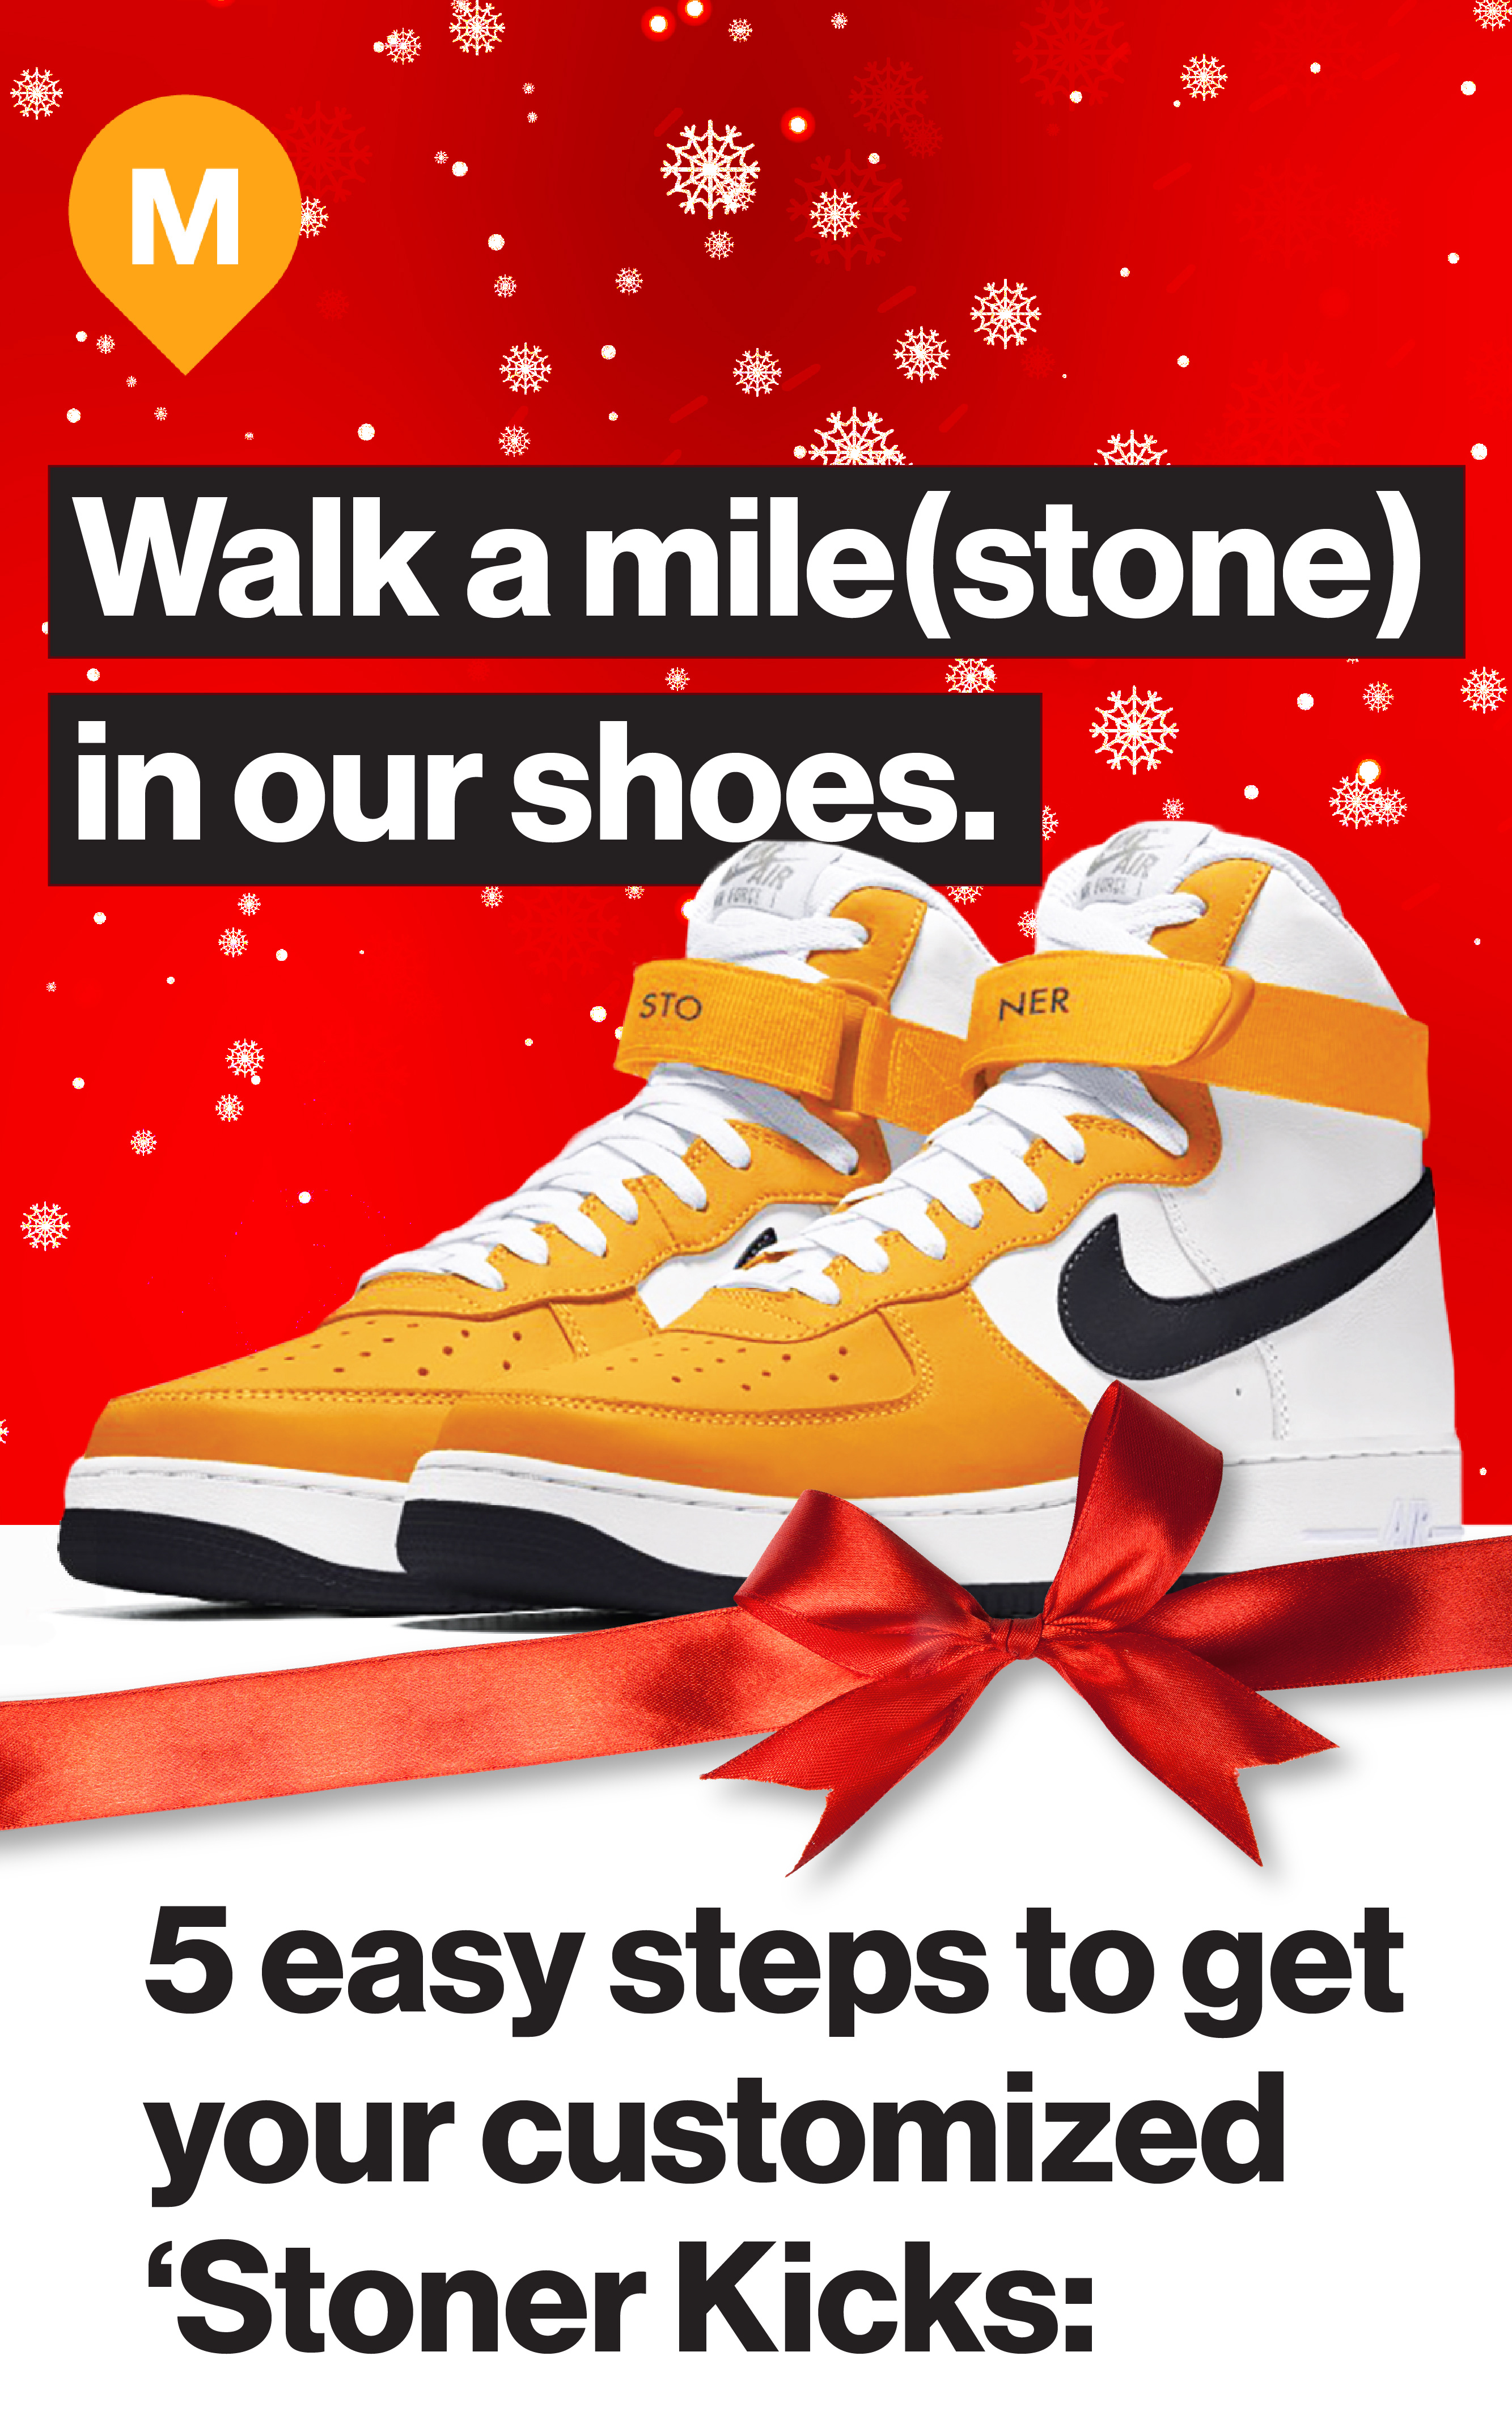 alk a mile(stone) in our shoes. 5 easy steps to get your customized 'Stoner Kicks:'